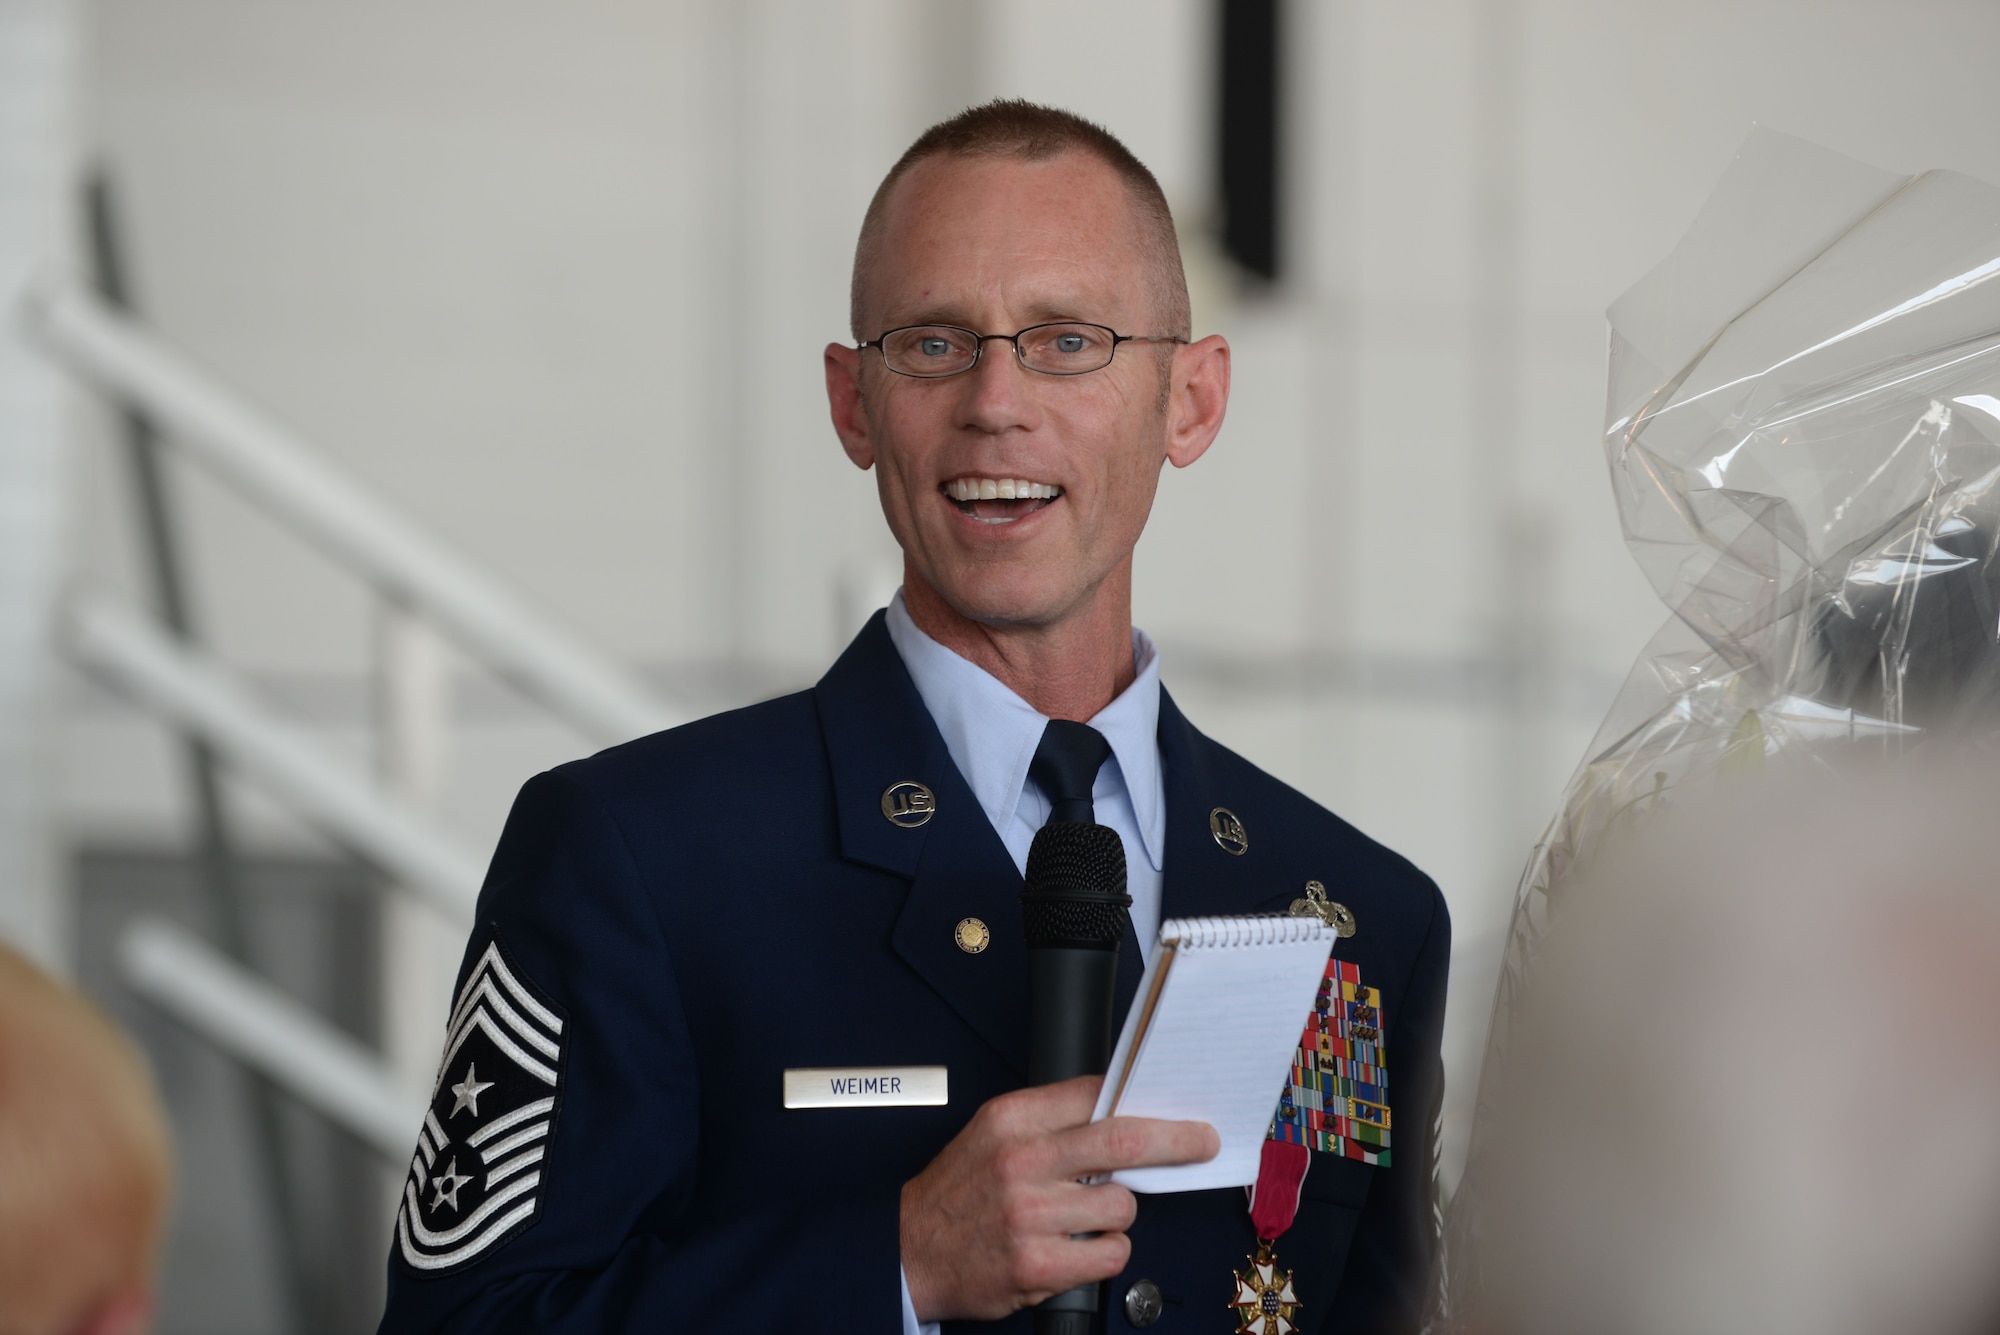 Chief Master Sgt. Geoff Weimer smiles at the crowd during his retirement ceremony at Minot Air Force Base, N.D., June 24, 2016. Weimer retired after 29 years of service and recently served as the command chief of the 5th Bomb Wing. (U.S. Air Force photo/Airman 1st Class Jessica Weissman)